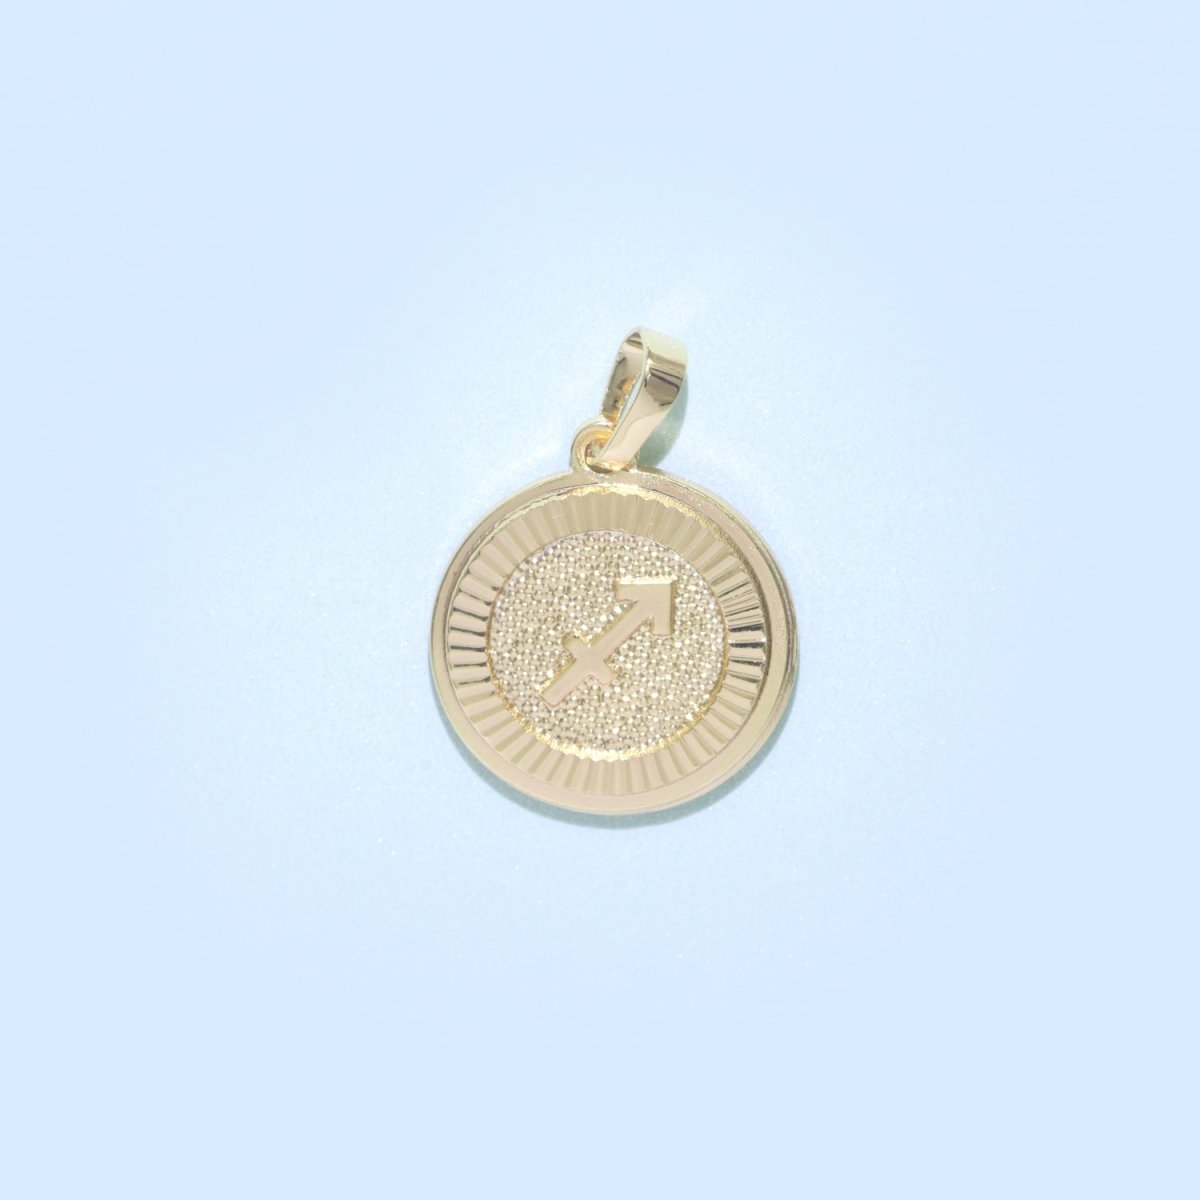 Dainty Gold Filled Constellation Charms, Zodiac Star Symbol, Horoscope Charm, Gold Astrological Pendant Medallion Minimalist Jewelry A-729 ~ A-740 - DLUXCA